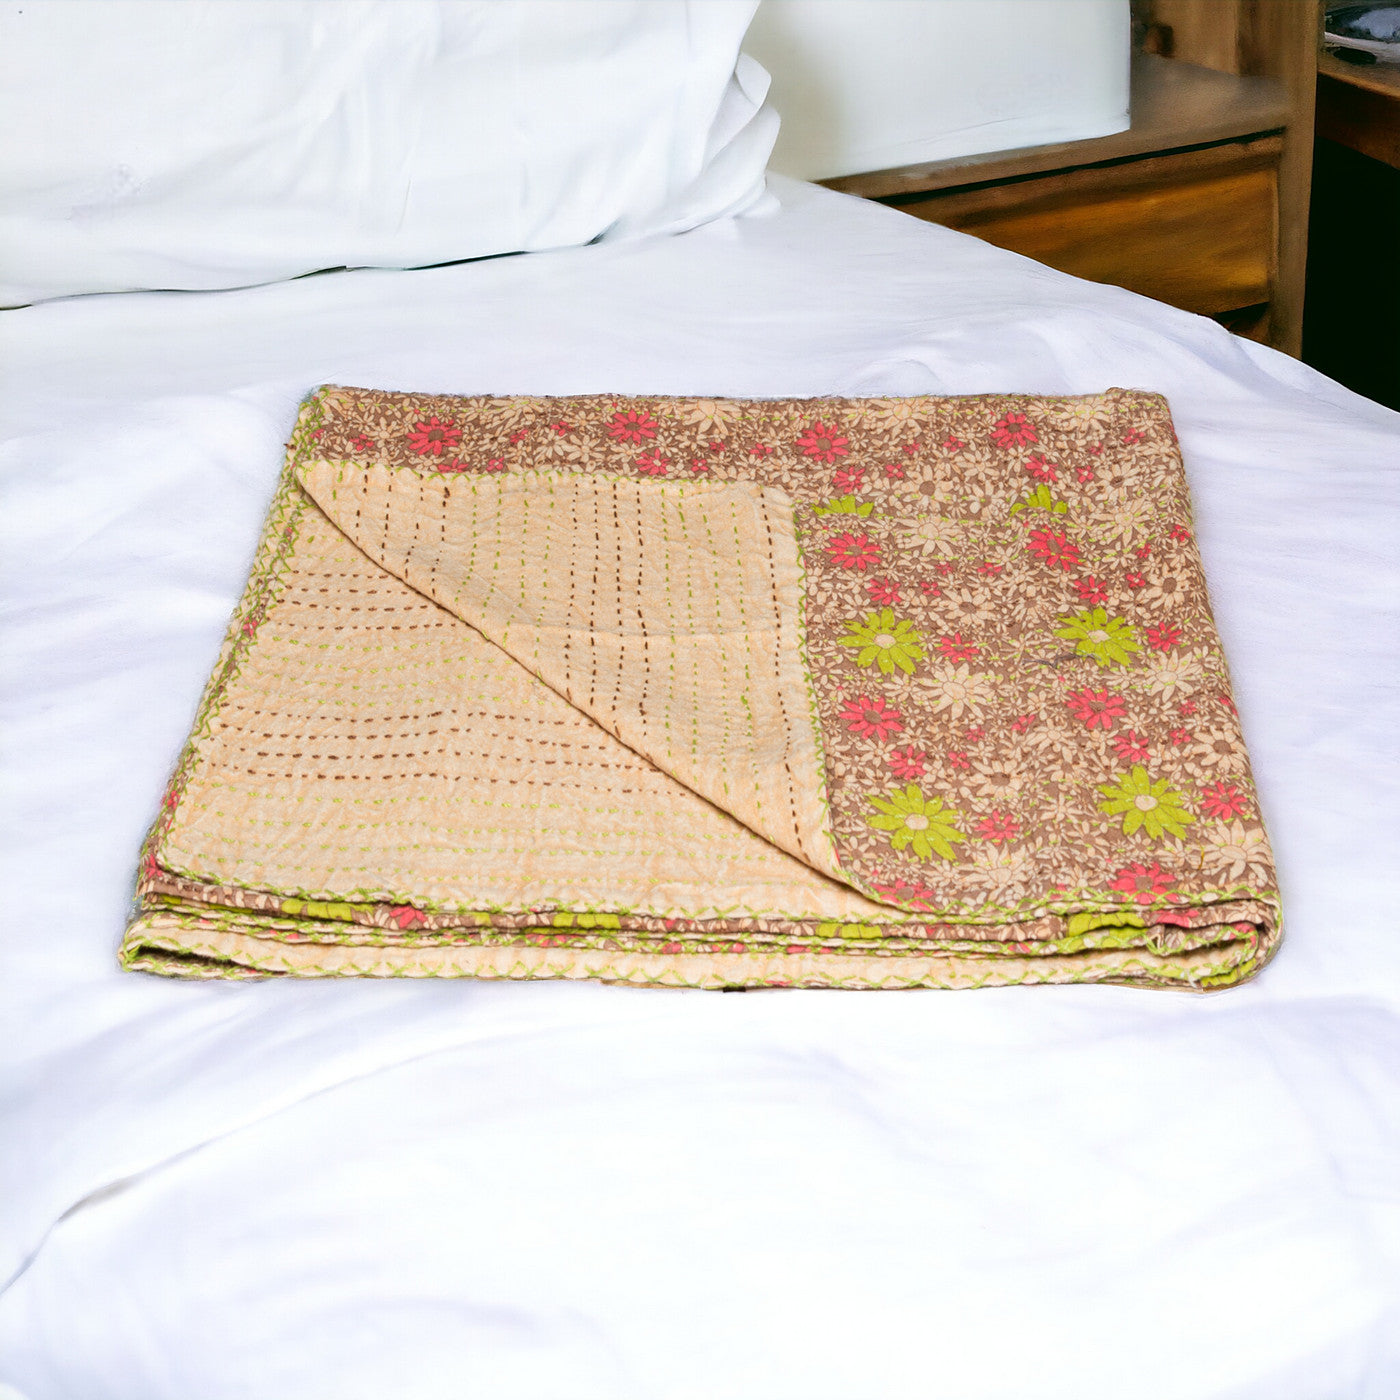 50" X 70" Green and Brown Kantha Cotton Floral Throw Blanket with Embroidery